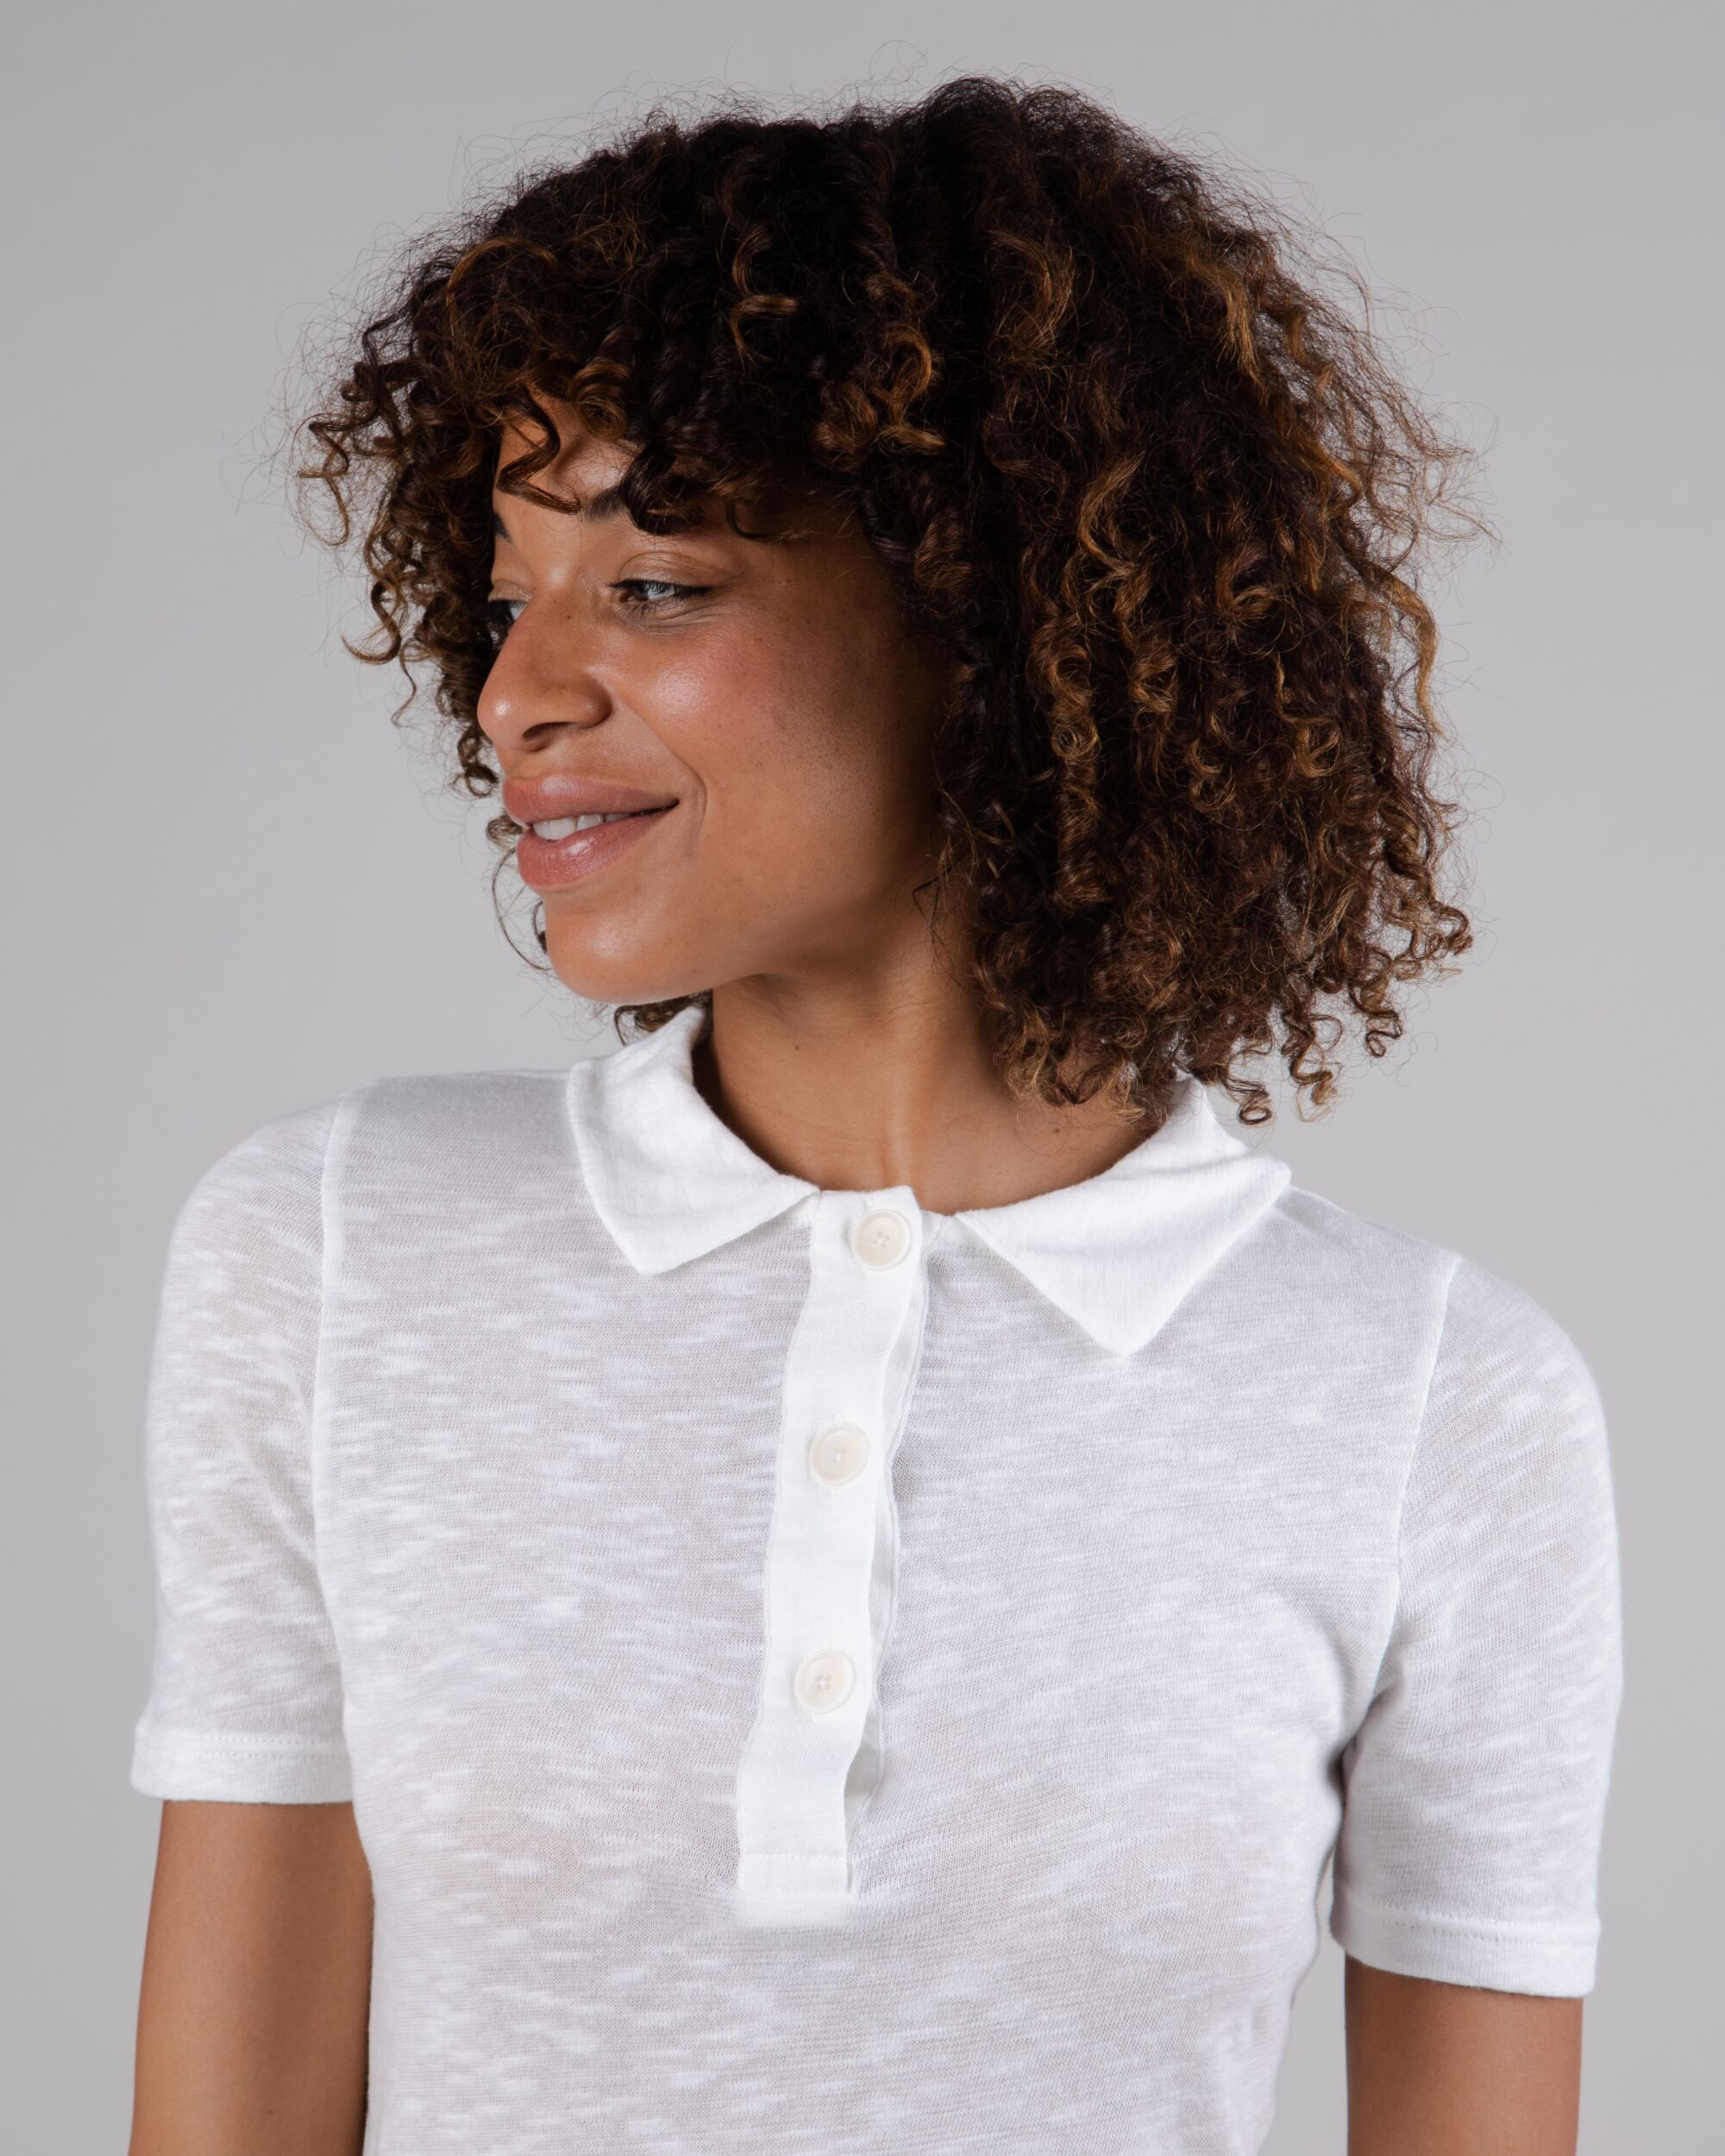 Buttoned polo shirt in off-white made from organic cotton by Brava Fabrics